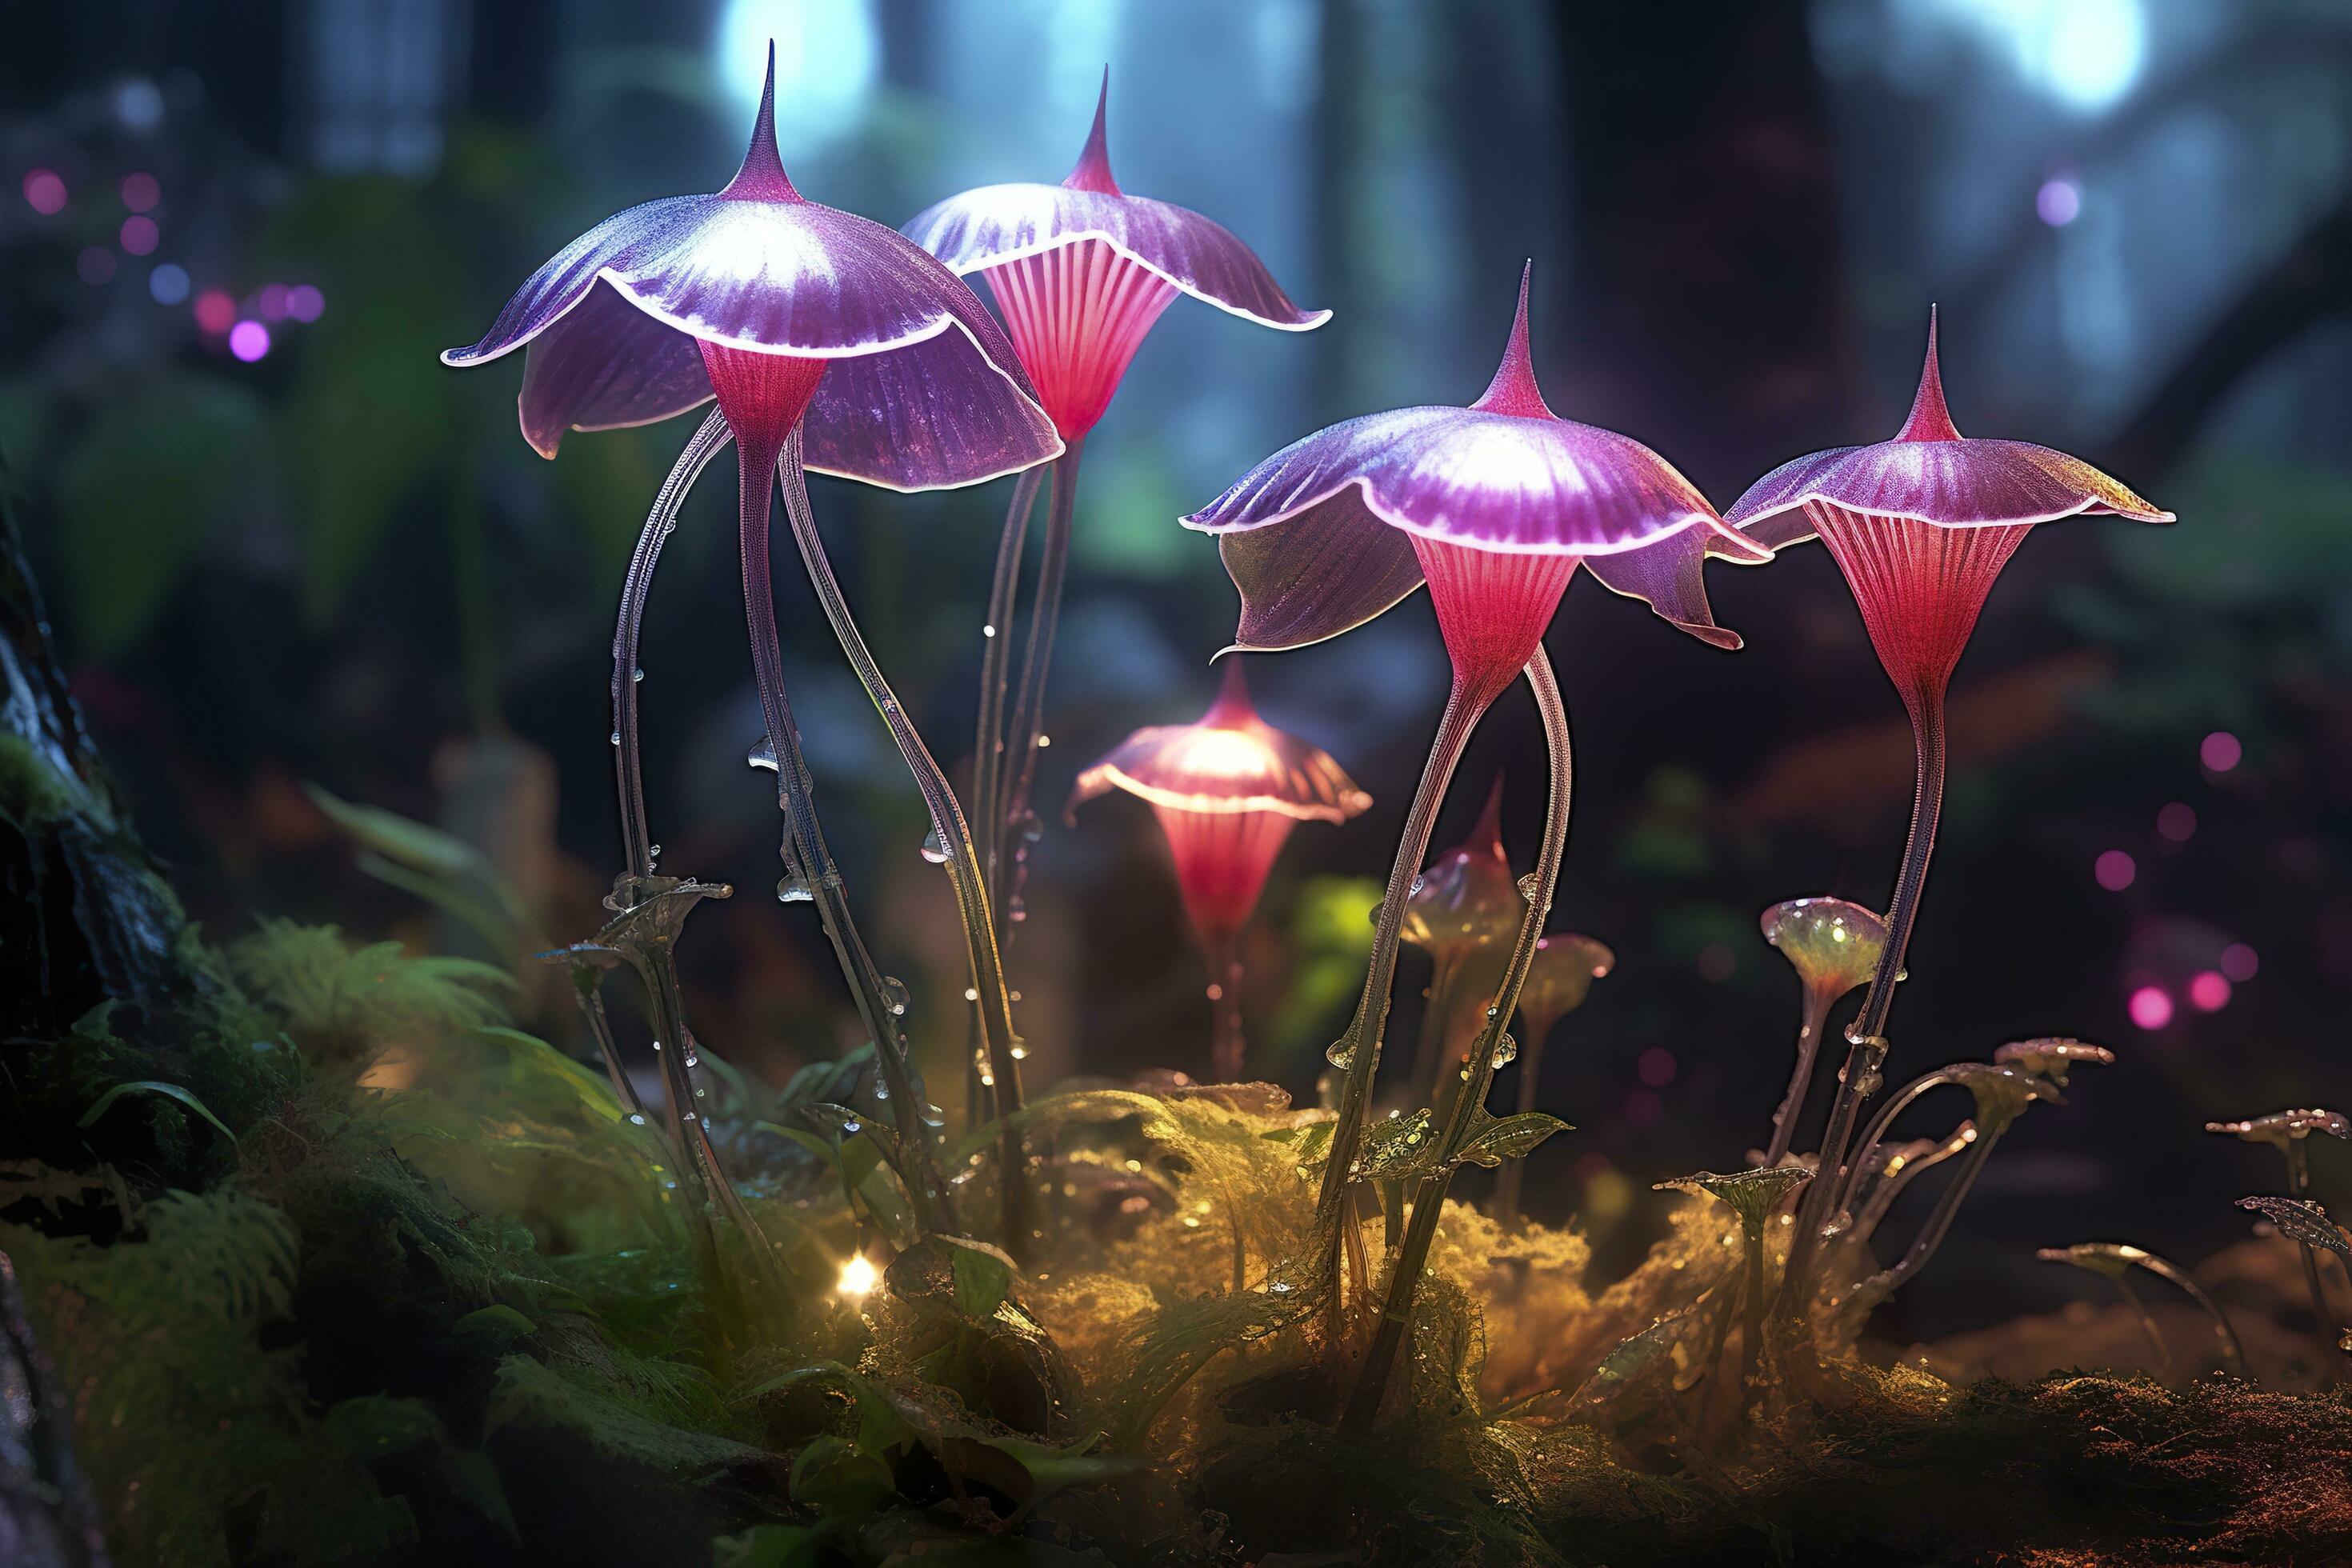 A Bioluminescent Alien Crystal Forest